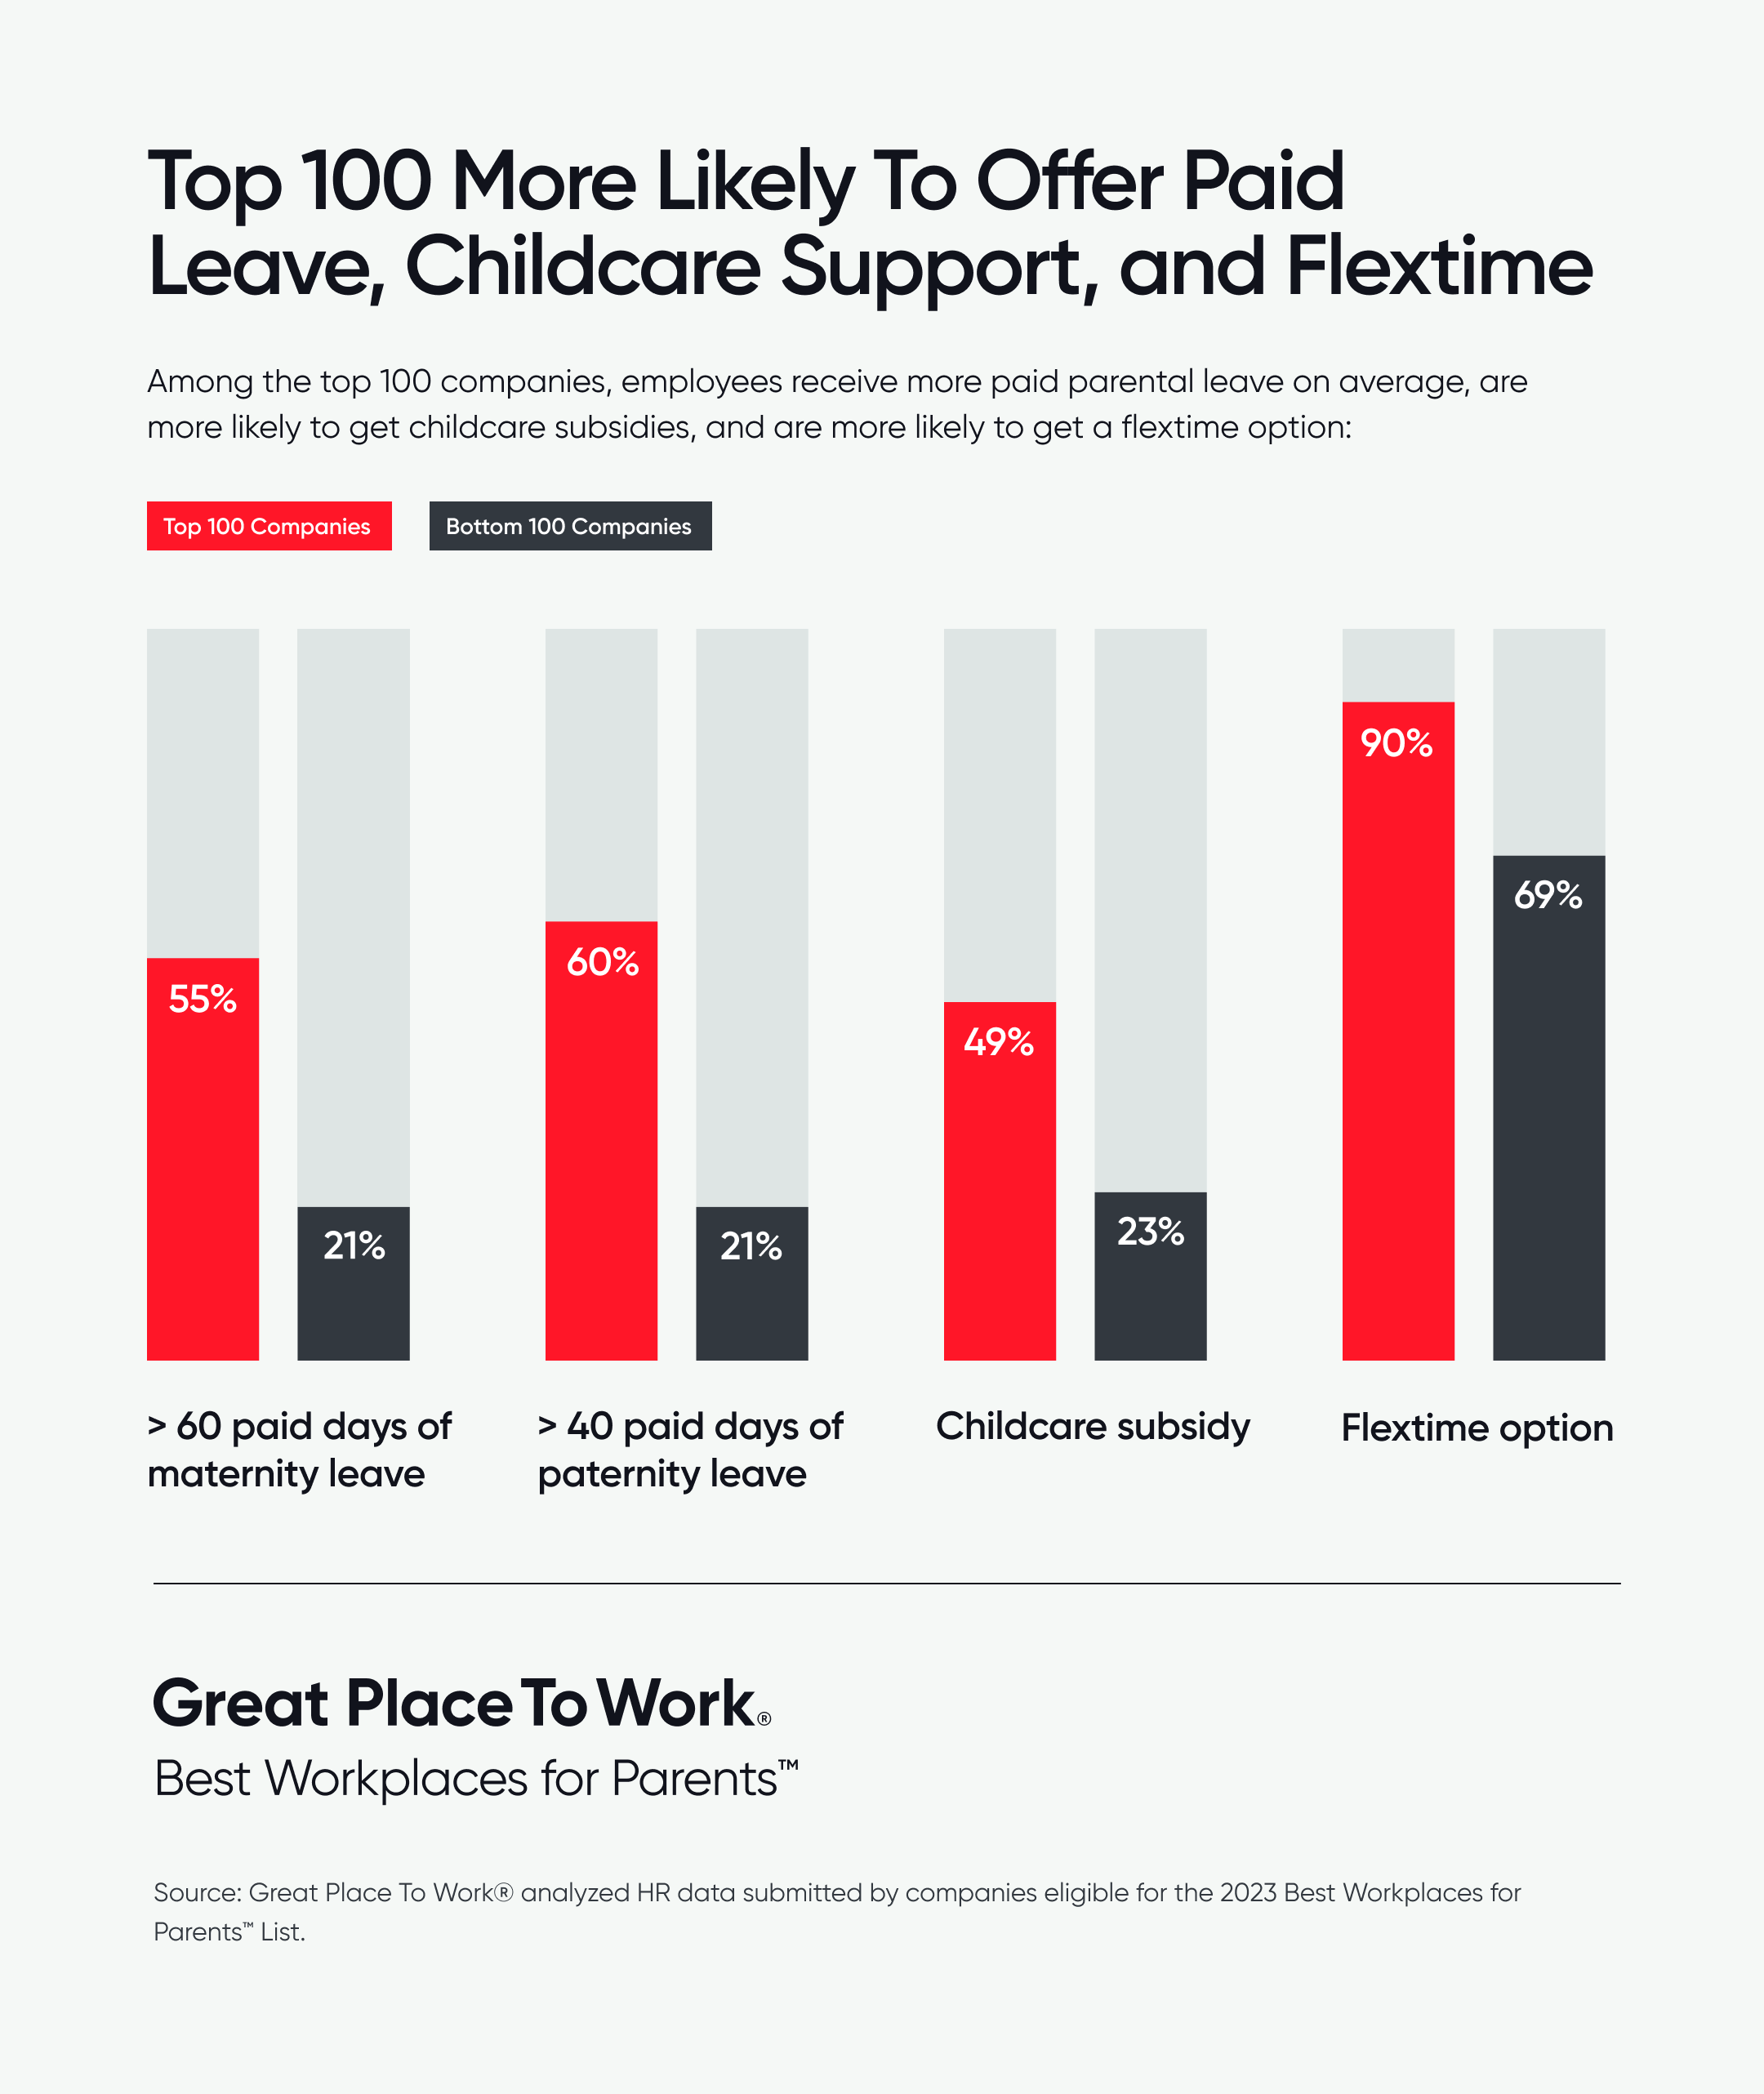 Top 100 More Likely To Offer Paid Leave Childcare Support and Flextime 1